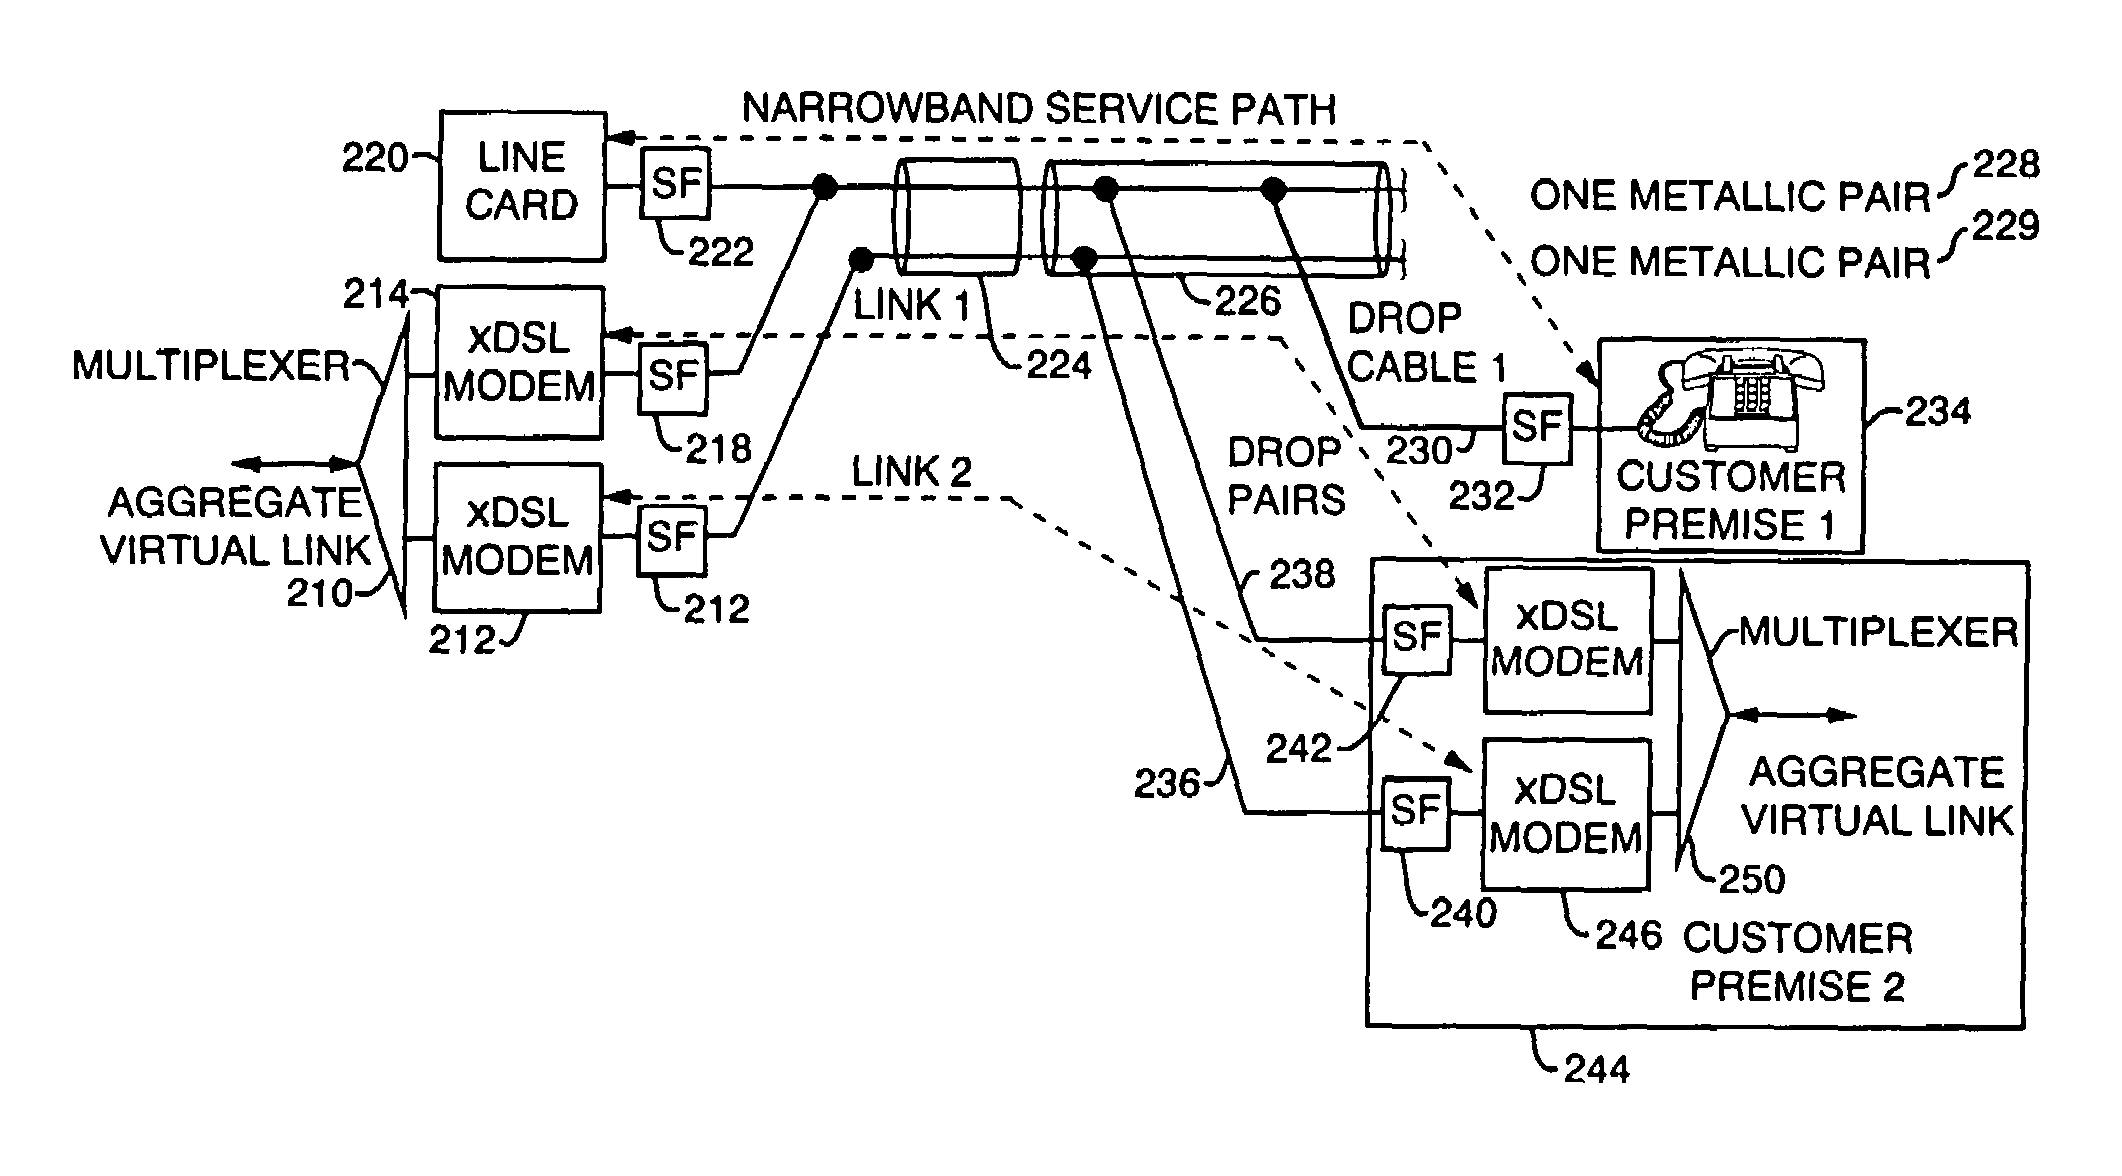 Method and apparatus for service multiplexing over telephone networks which employ bridged tap construction